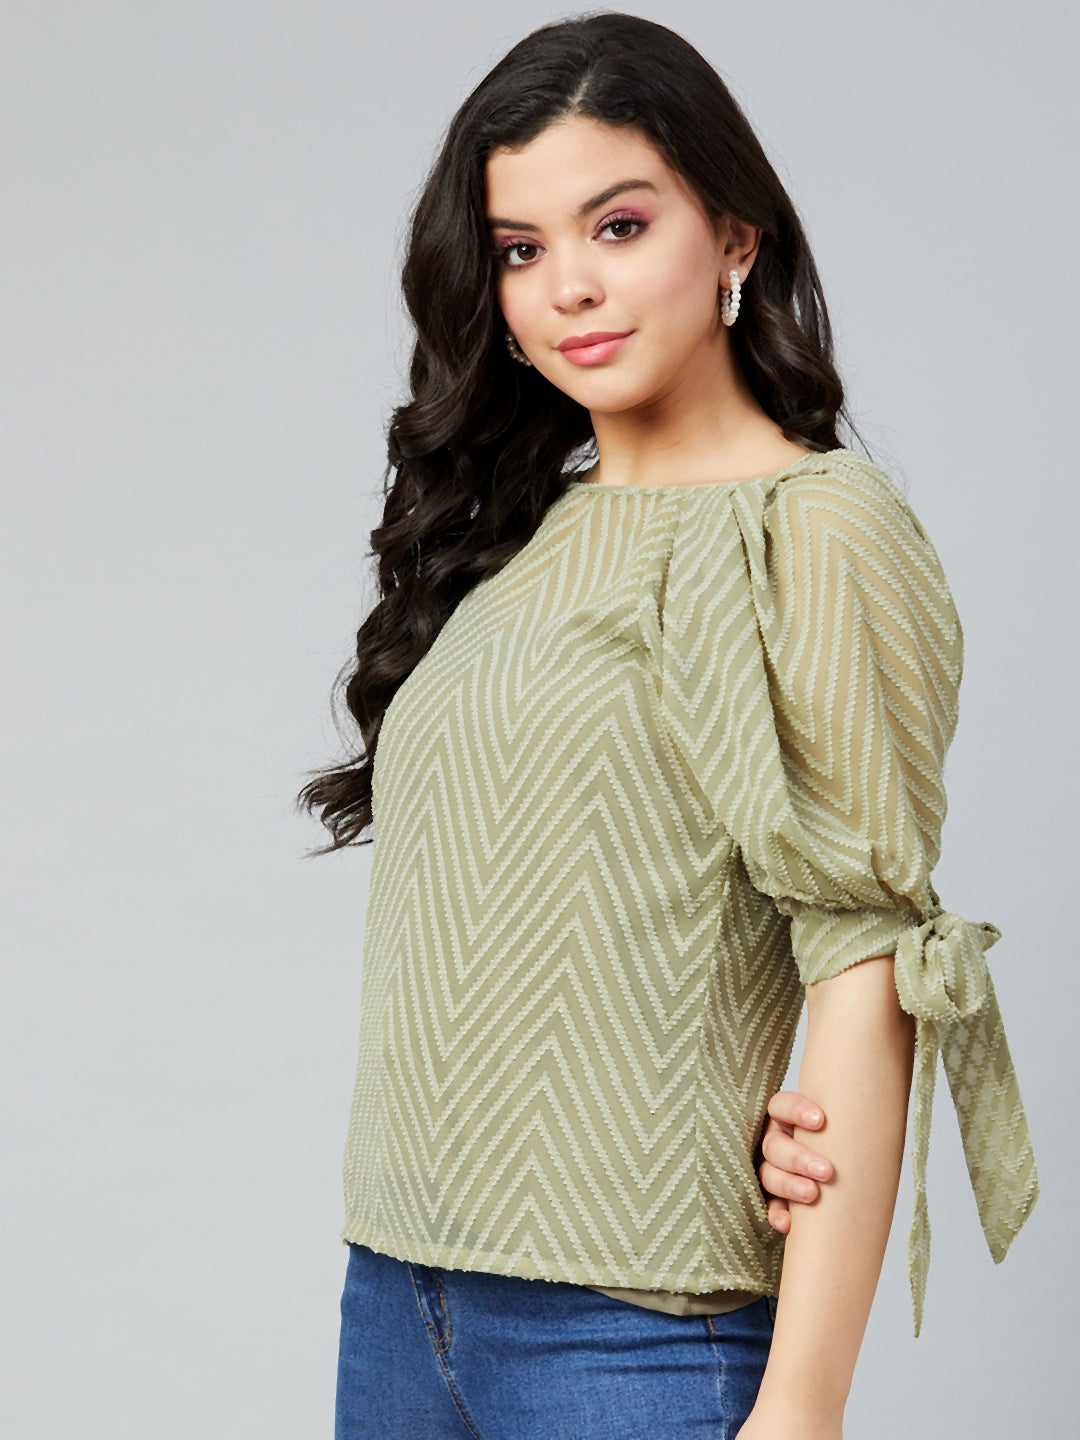 Athena Olive Green Puff Sleeves Georgette Regular Top - Athena Lifestyle